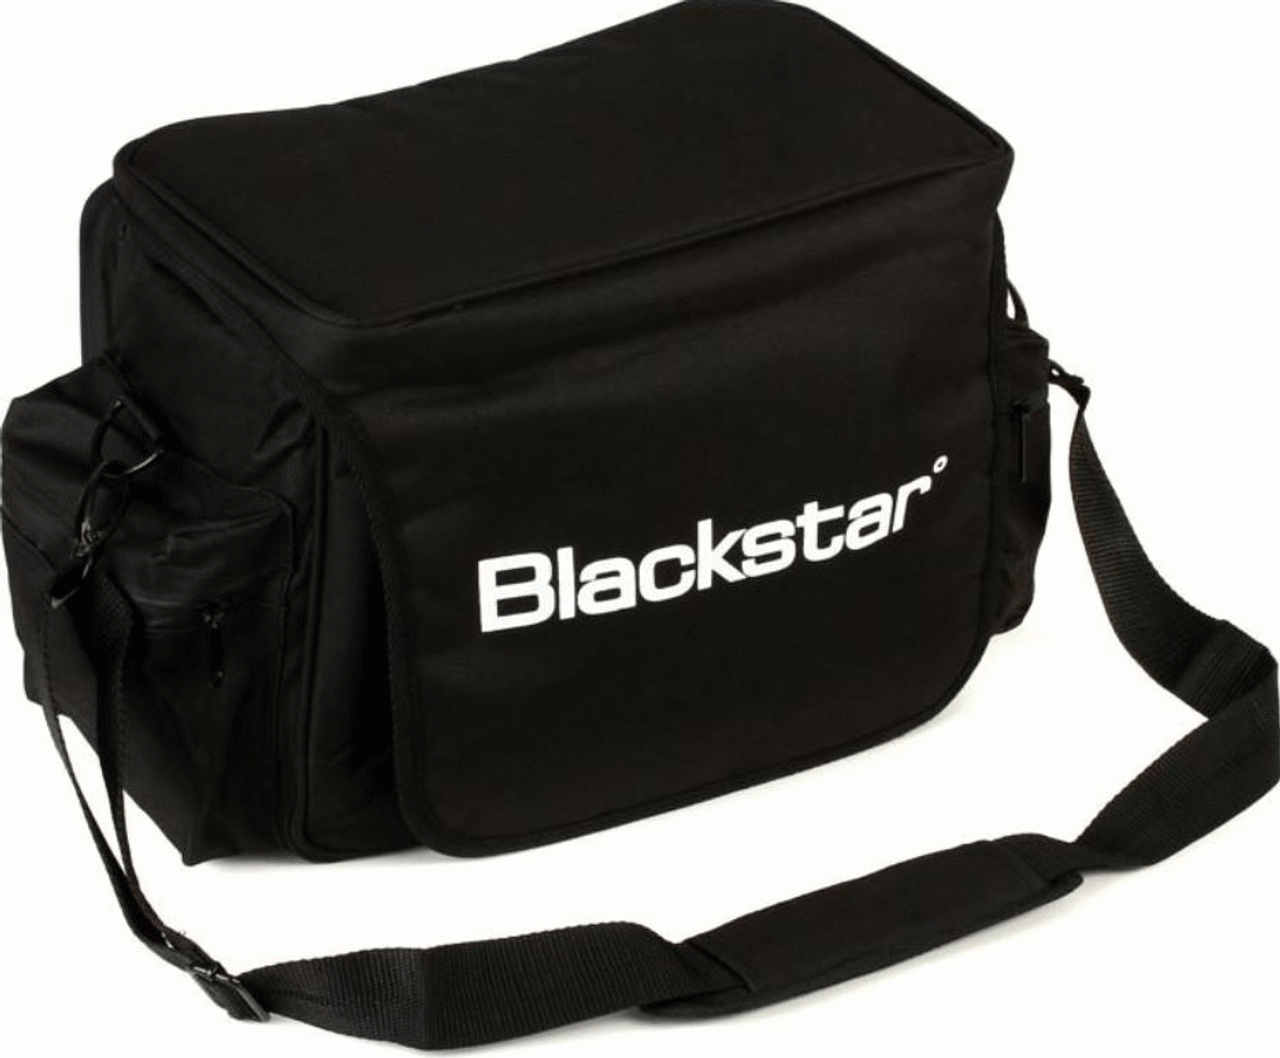 Blackstar Padded Bag For Superfly And Beam